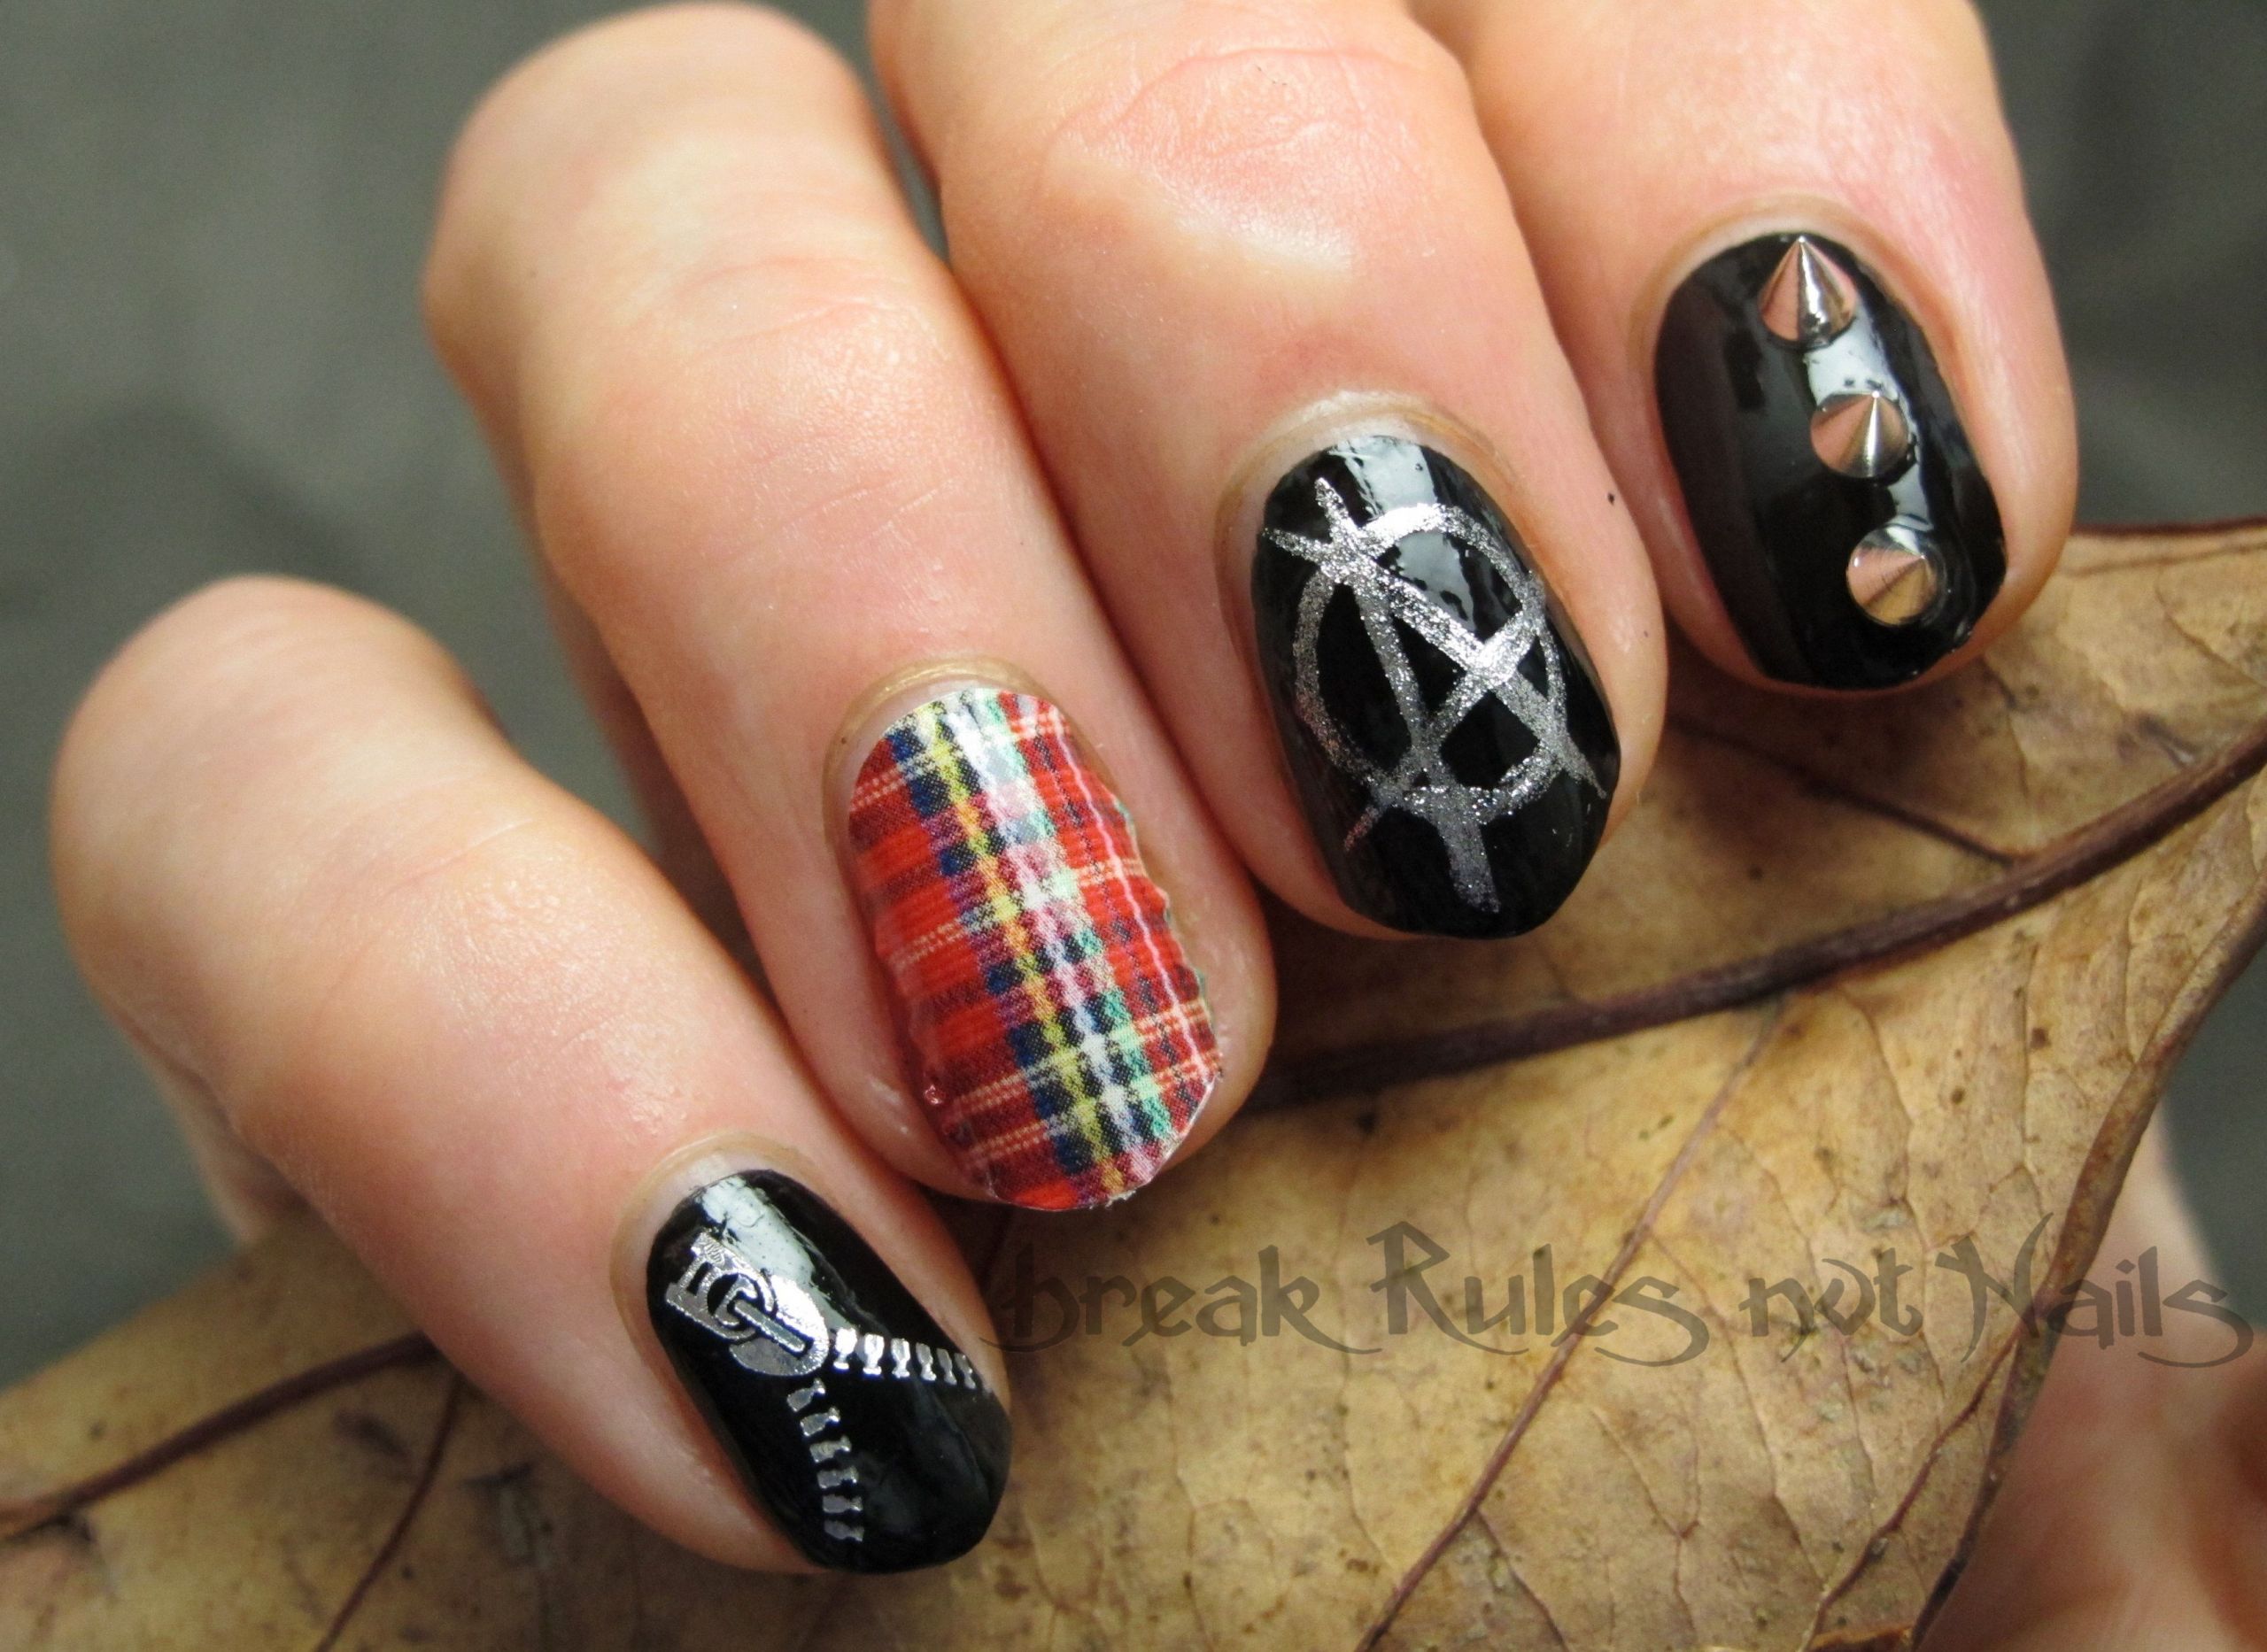 4. "Punk Inspired Nails" - wide 1